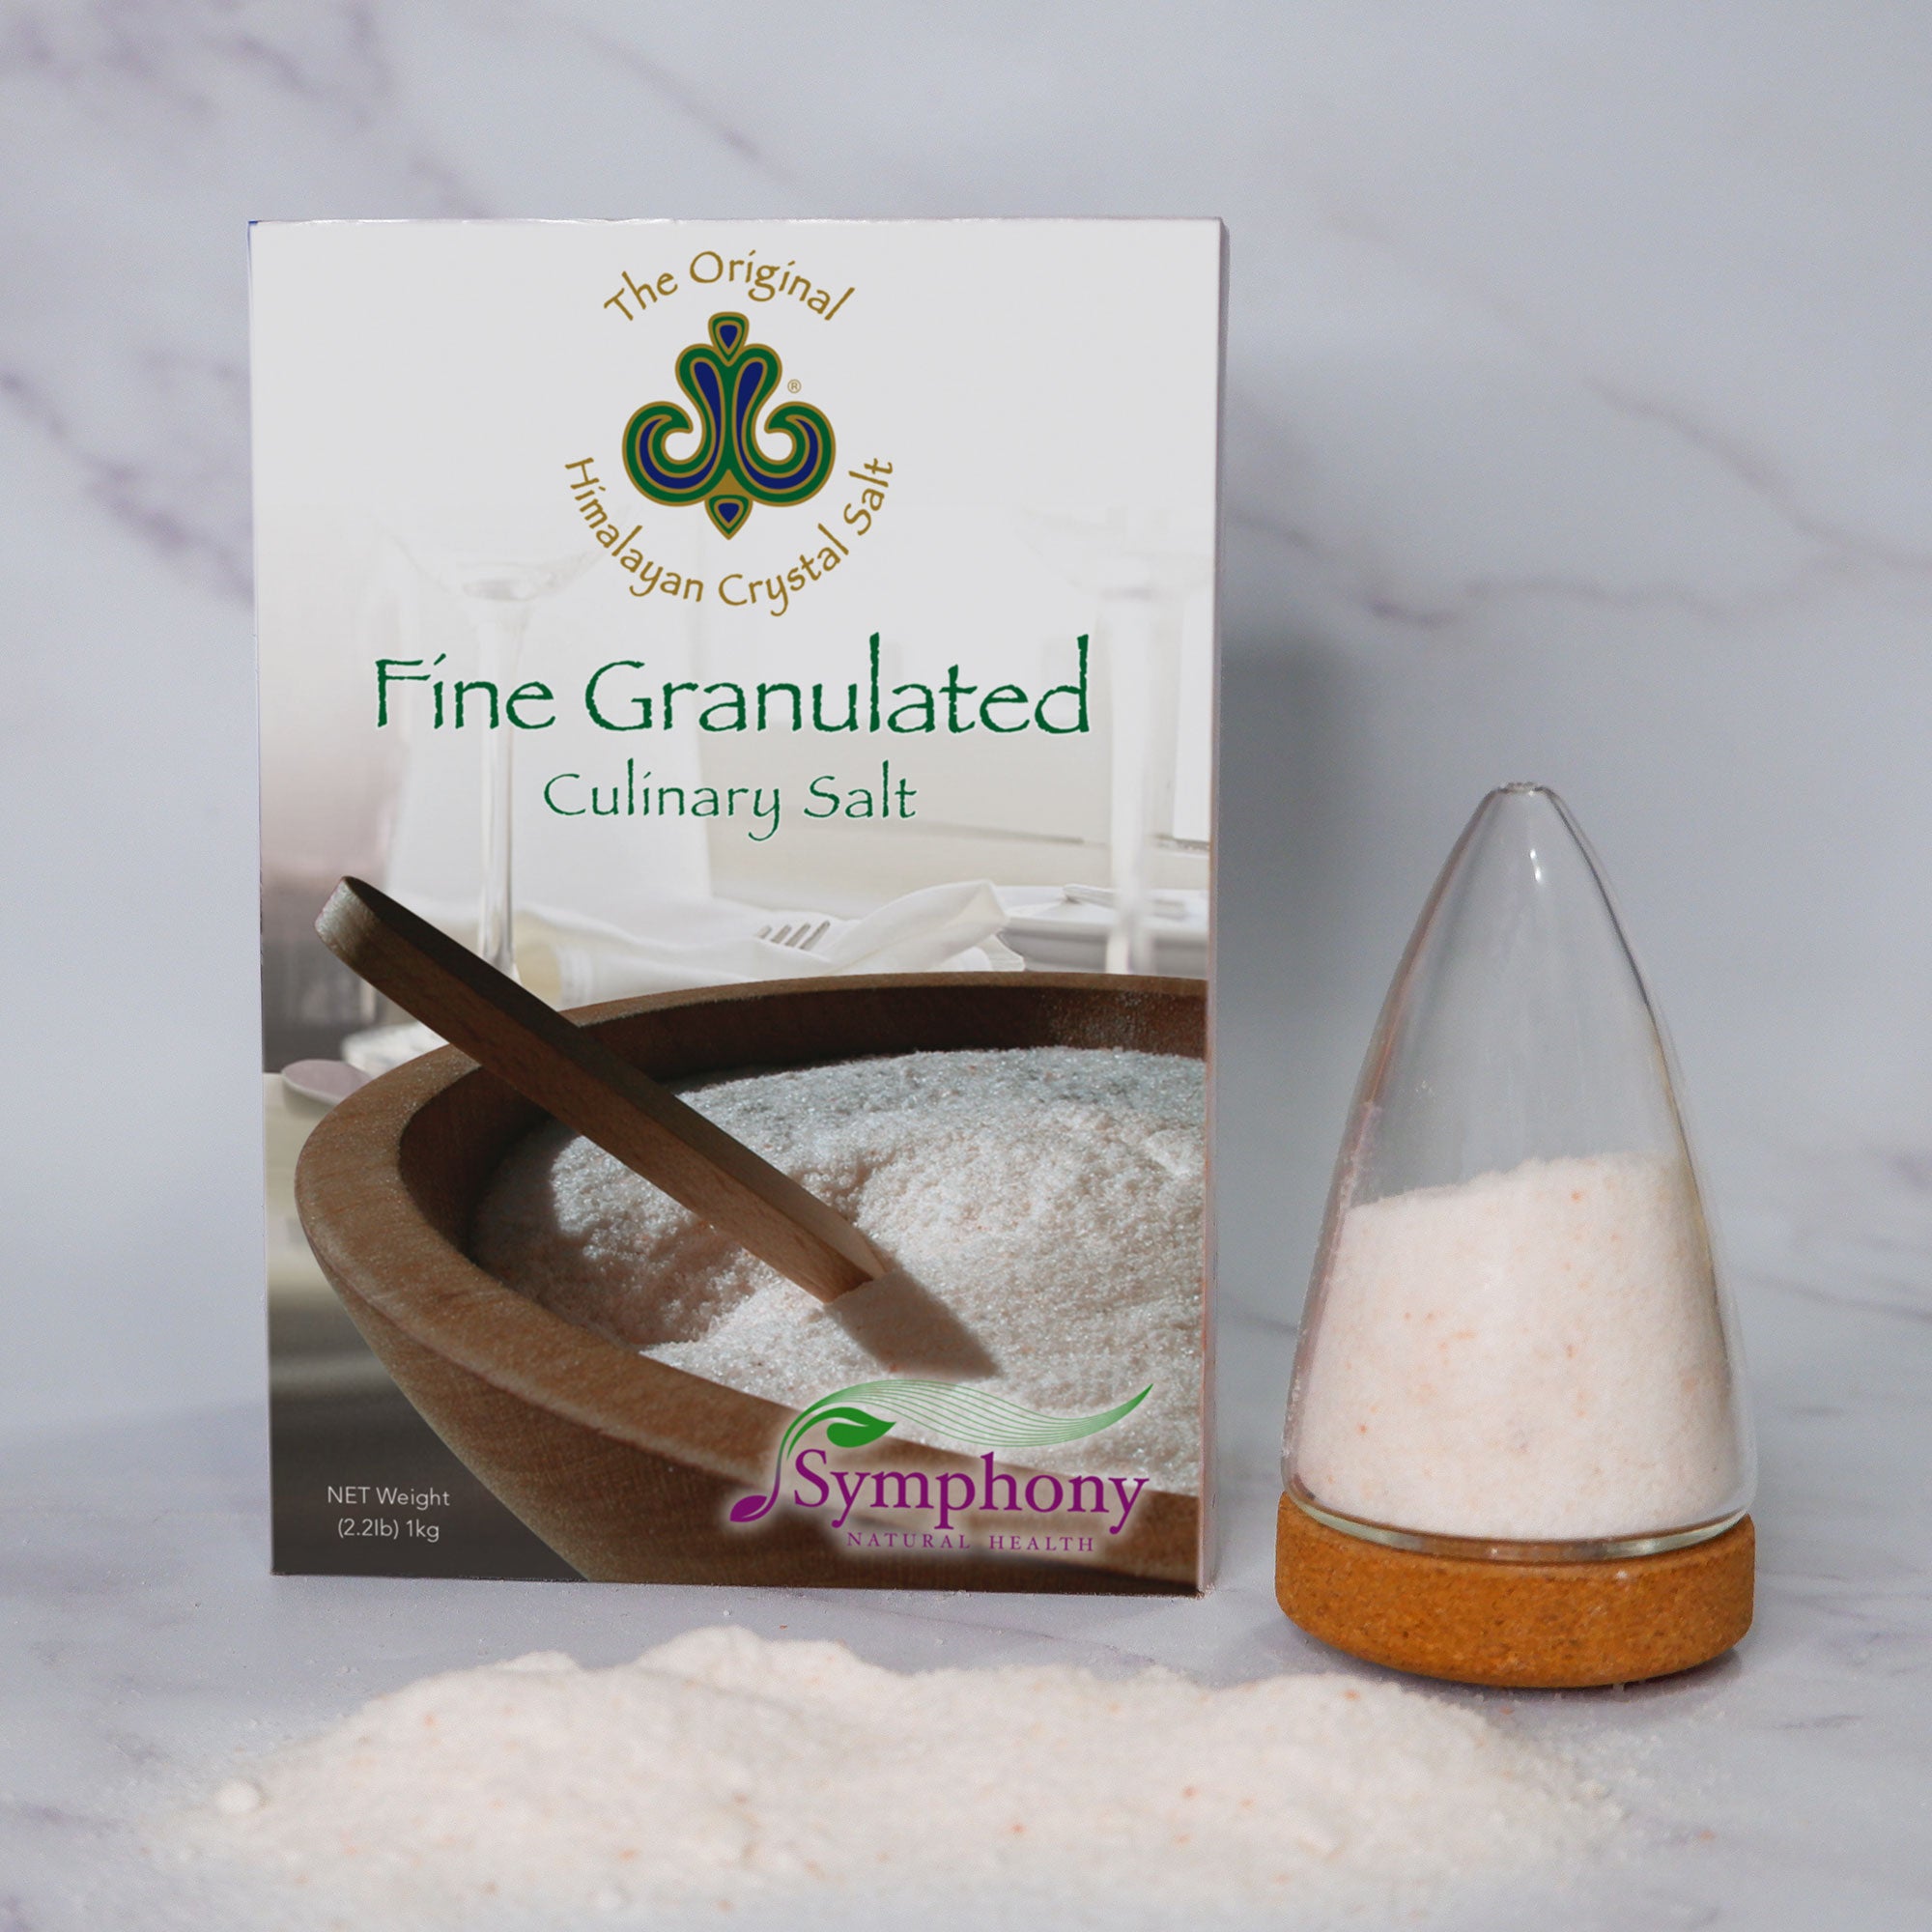 Save 5% when you bundle fine culinary salt with our glass salt shaker with cork lid base